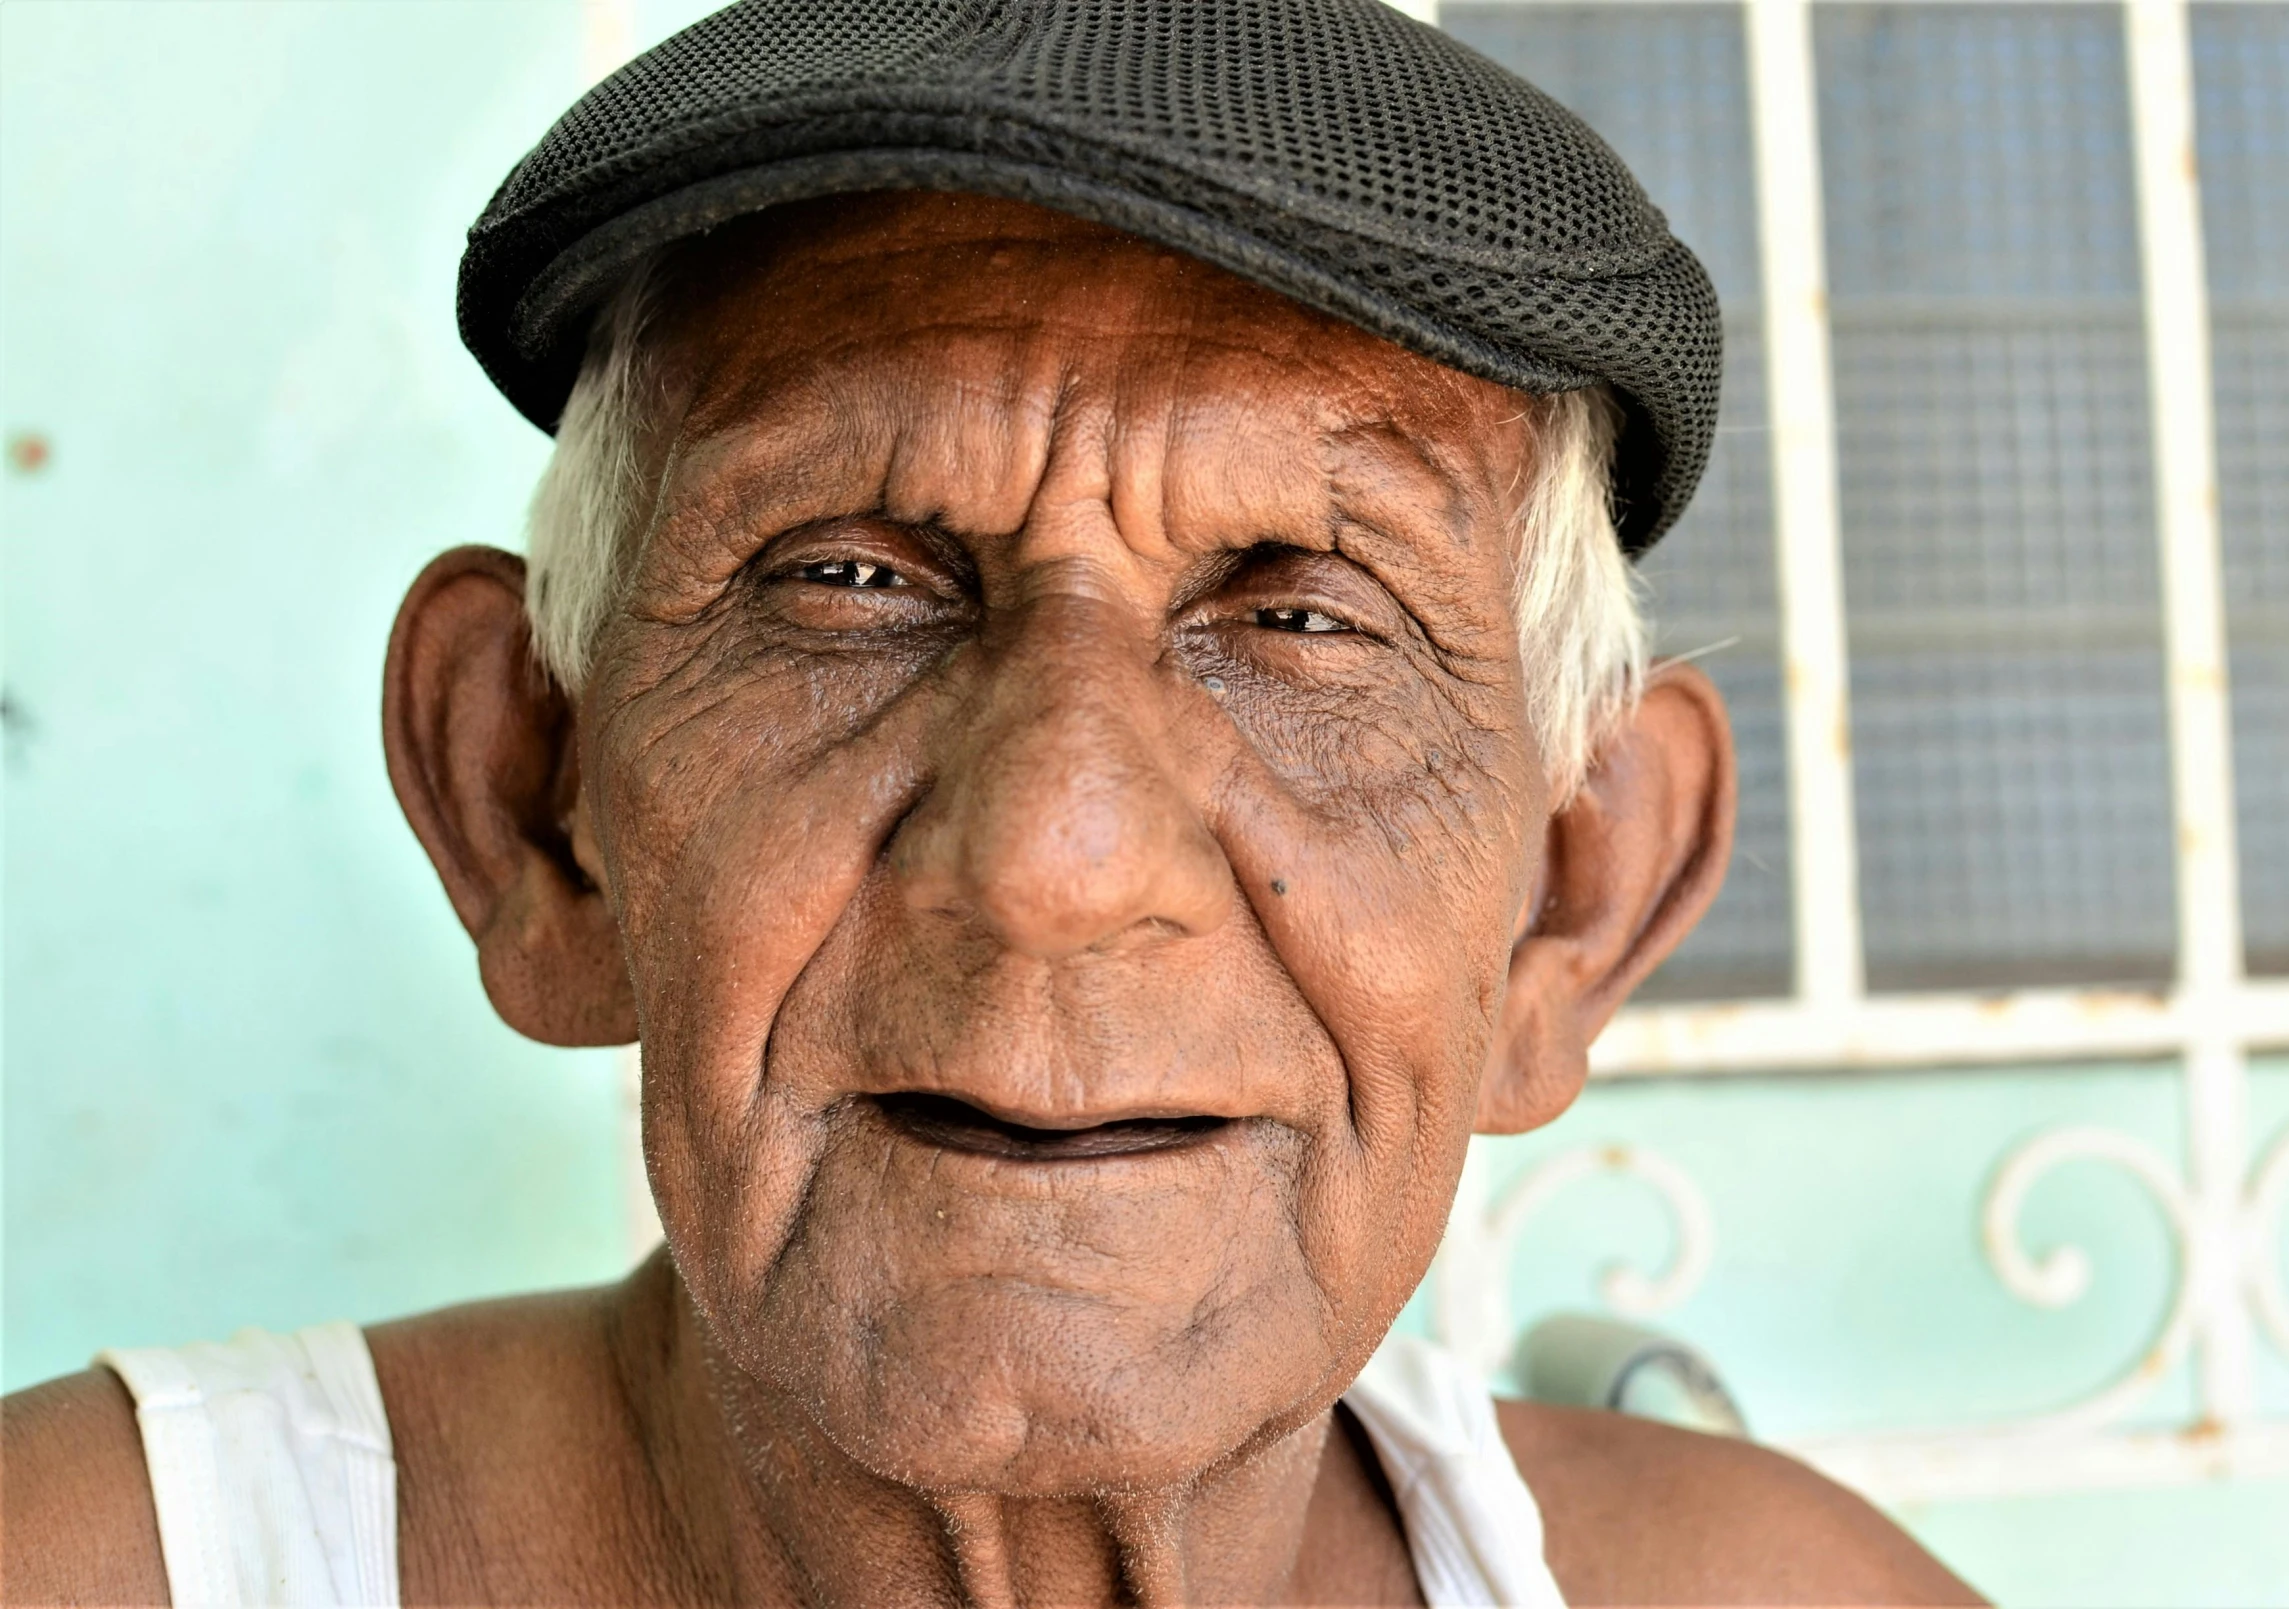 an old man with a black hat and eyes